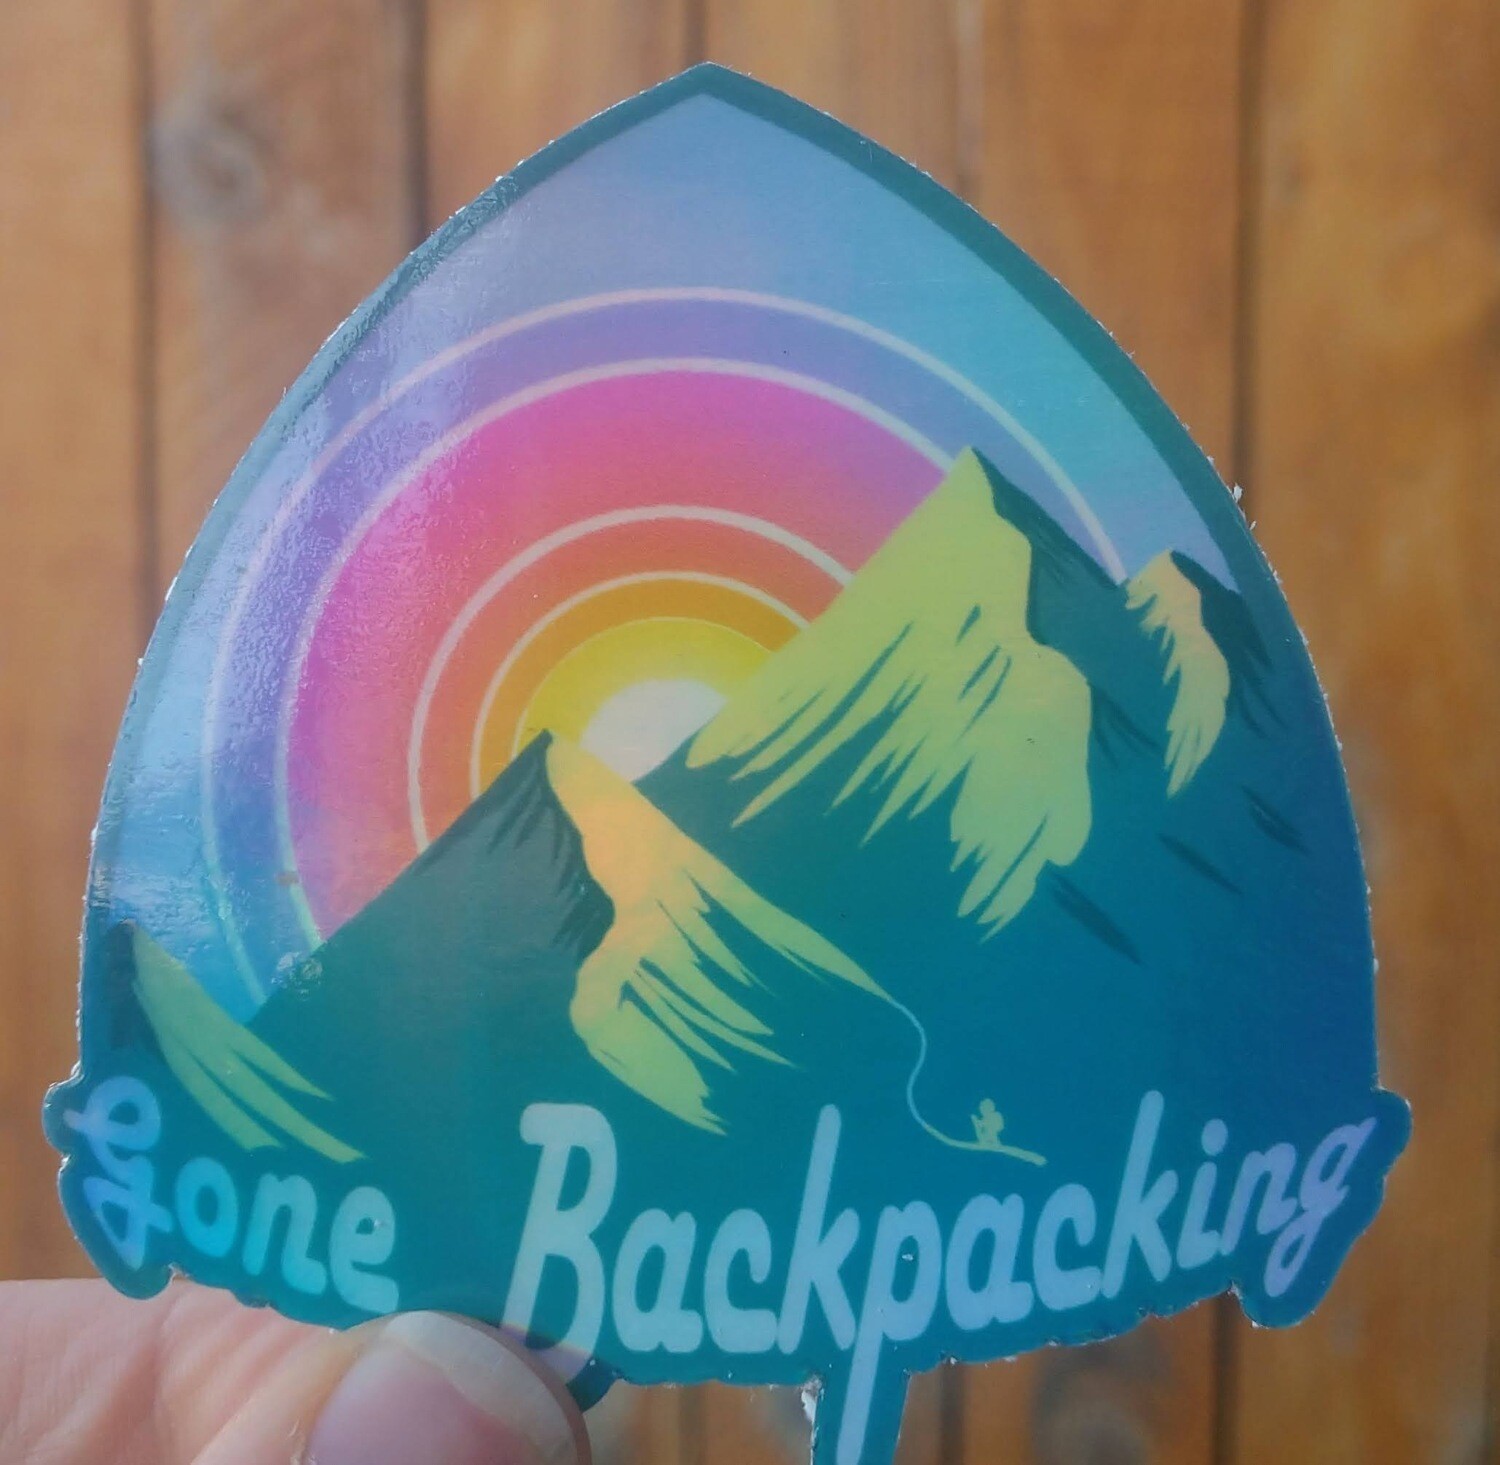 Gone Backpacking Holographic Sticker